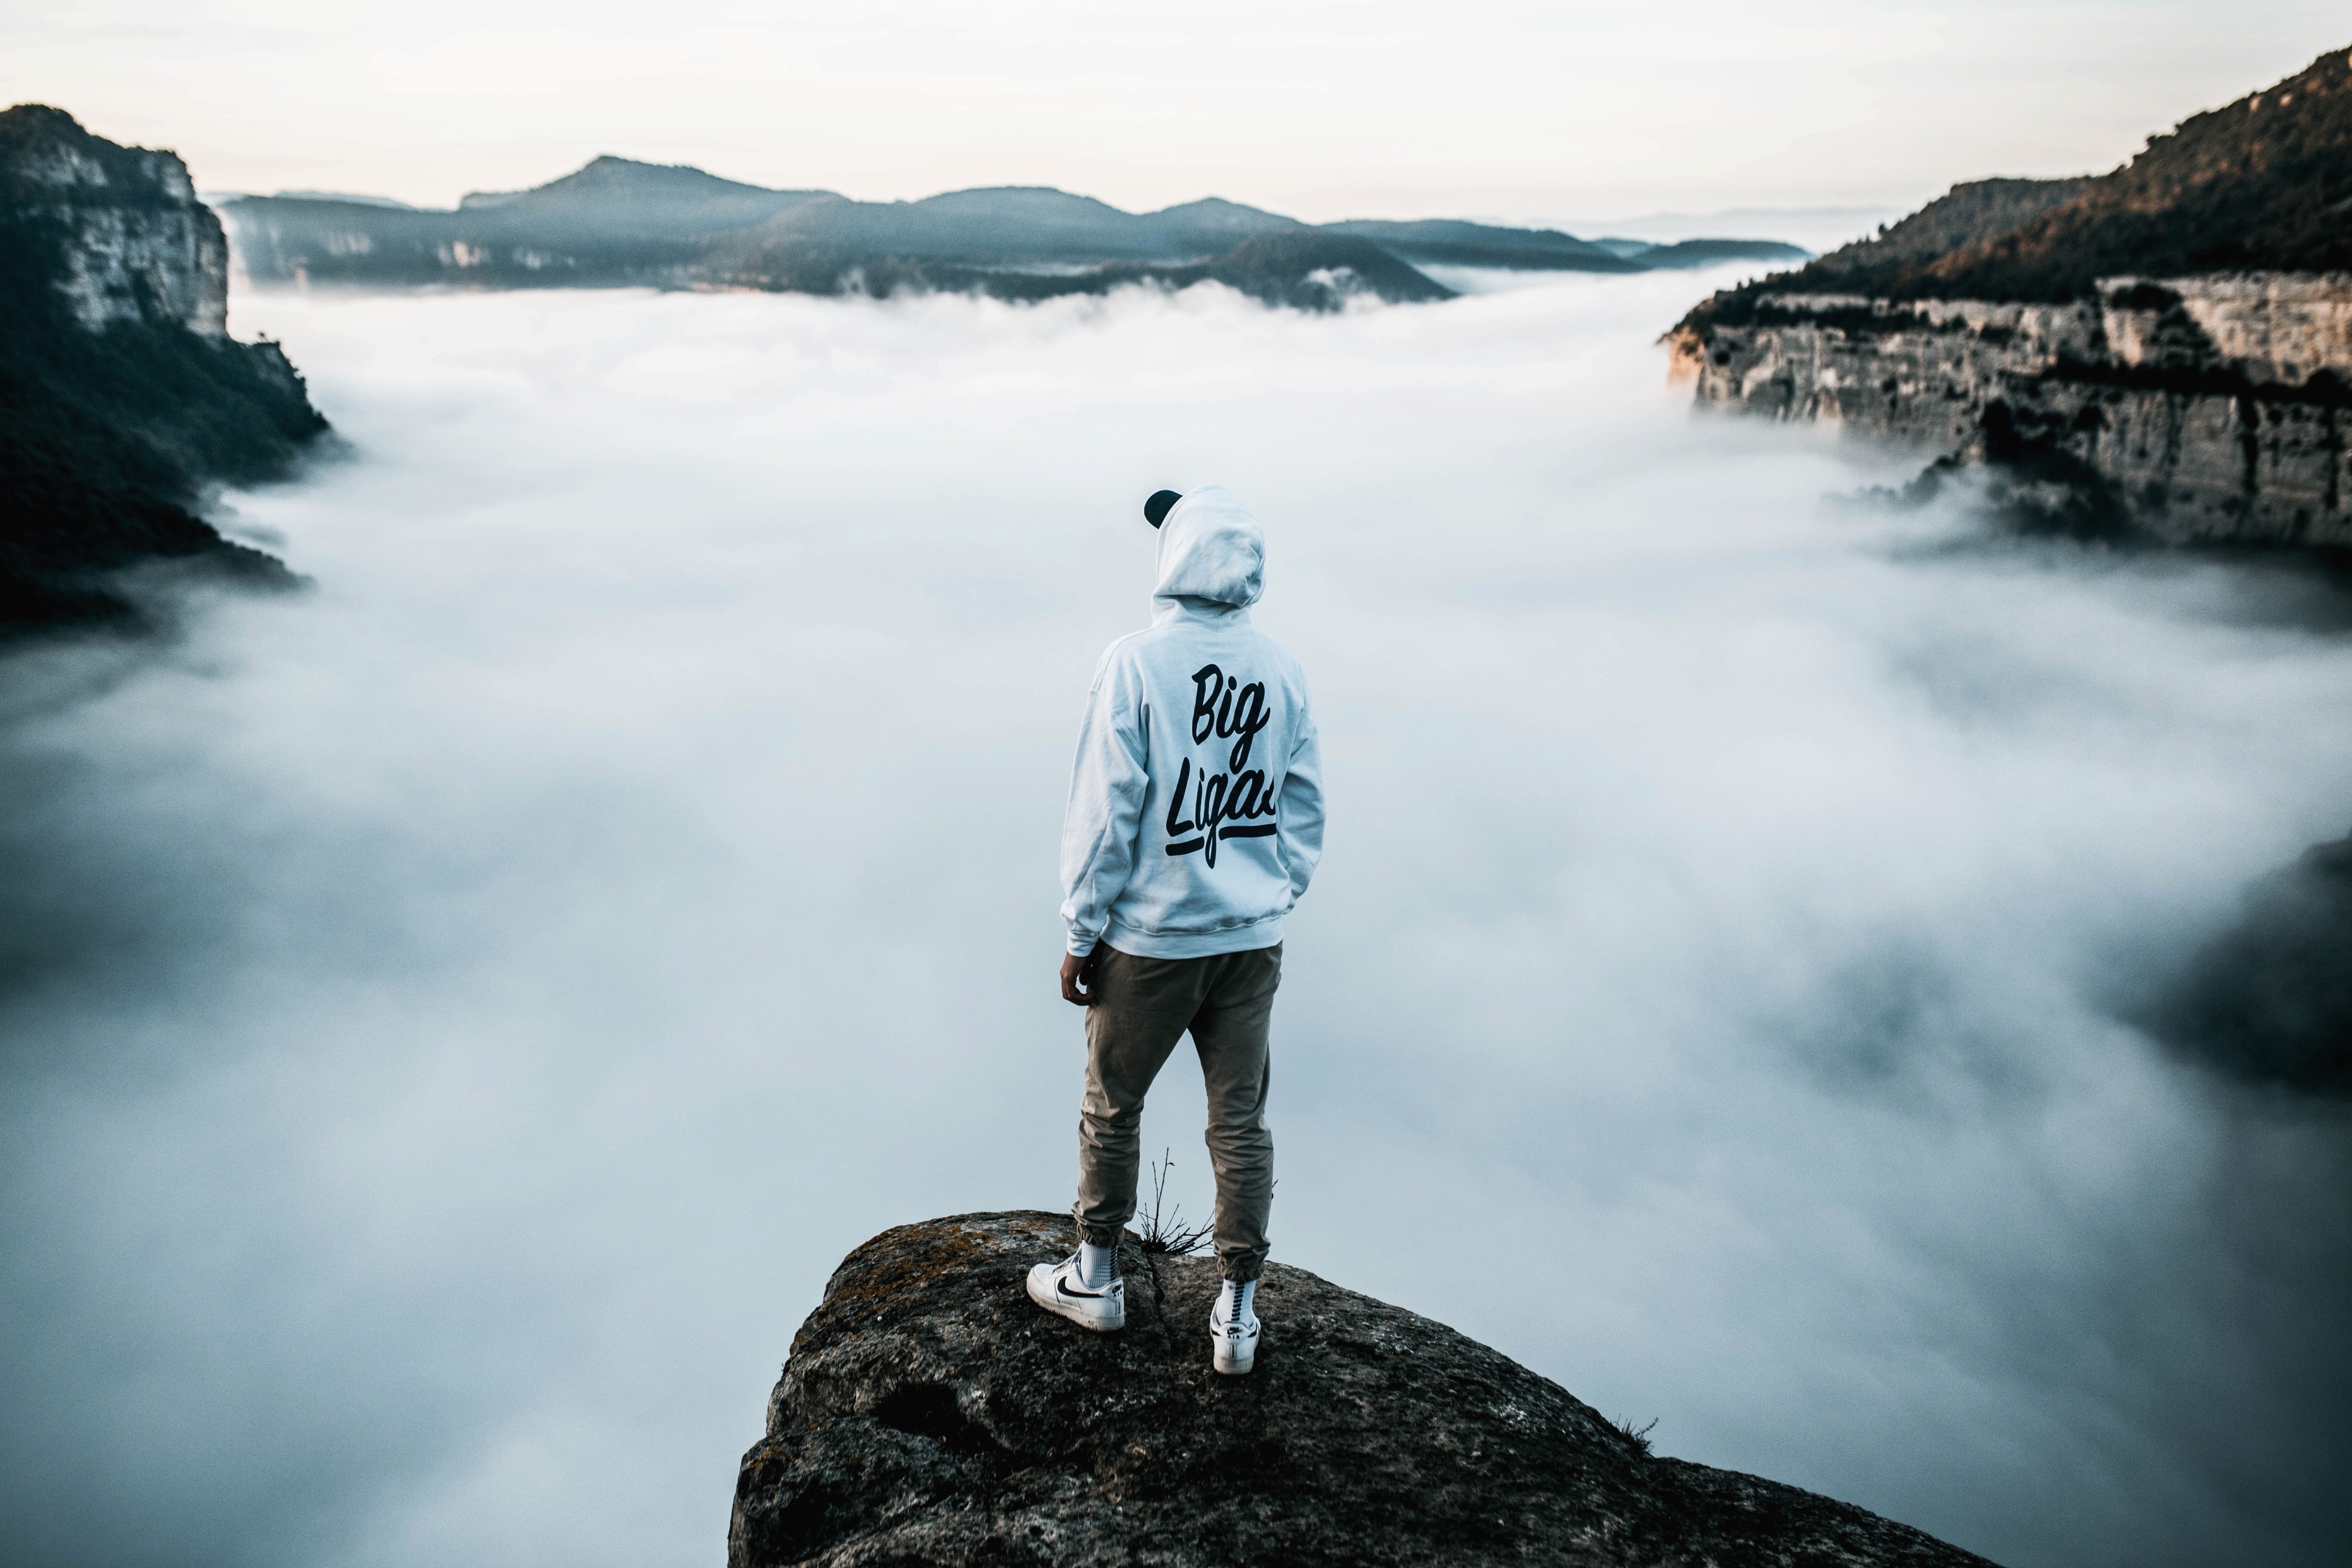 vertical wallpaper alone, loneliness, miscellaneous, miscellanea, sneakers, fog, cap, lonely